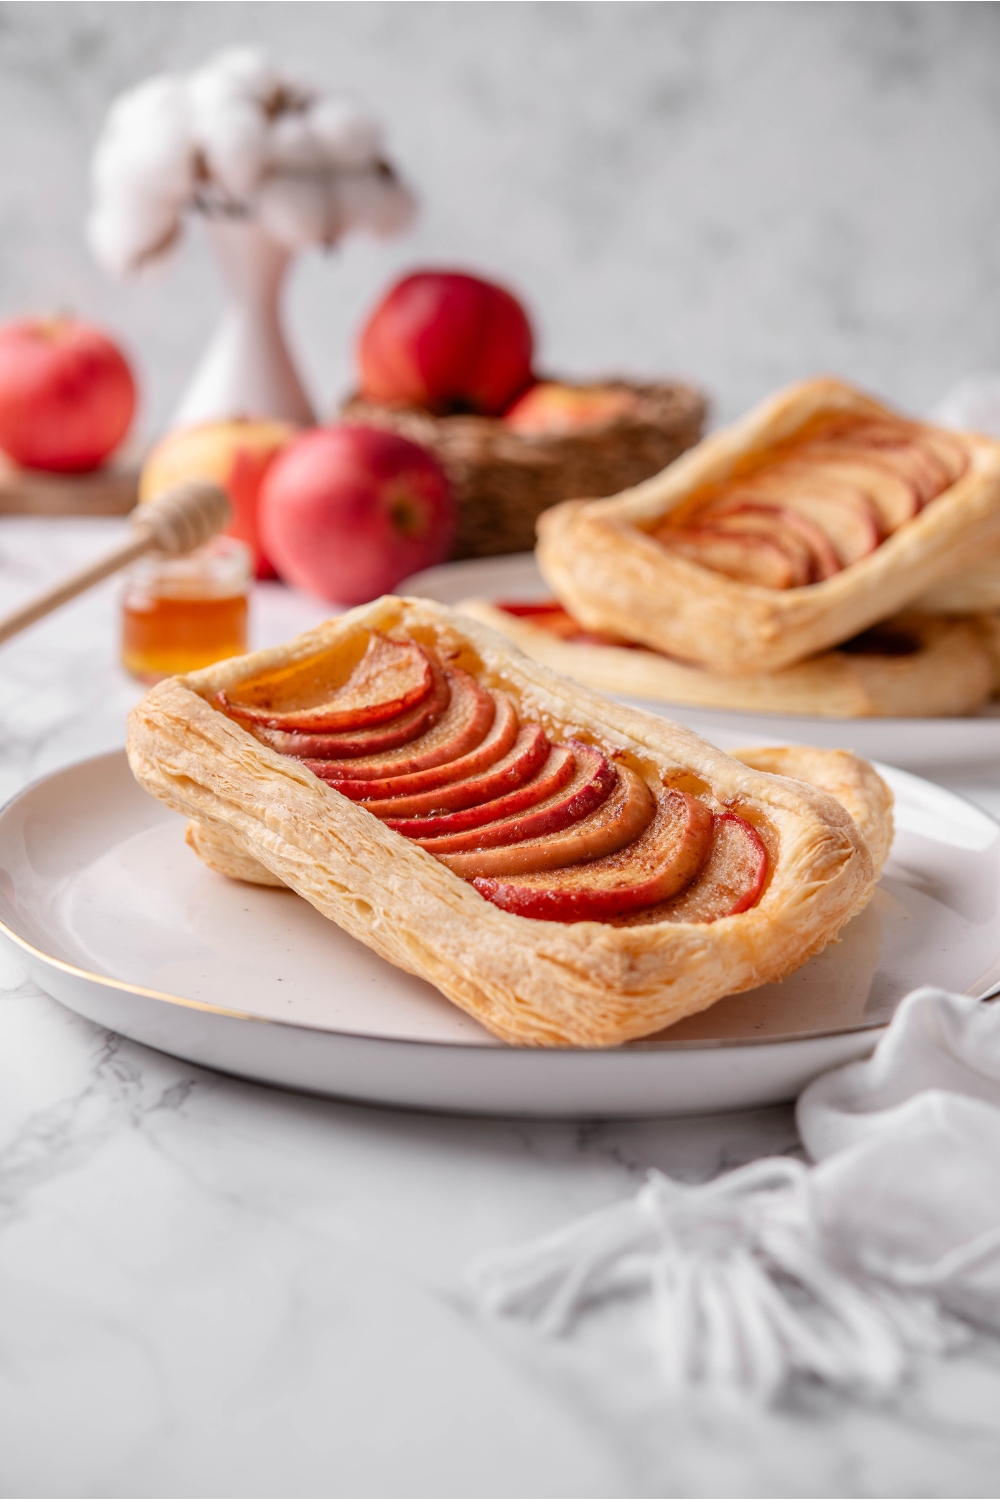 A puff pastry dough that has apples lined down the middle of it overlapping one another. The pastry is on a white plate with another pastry behind it on the plate.